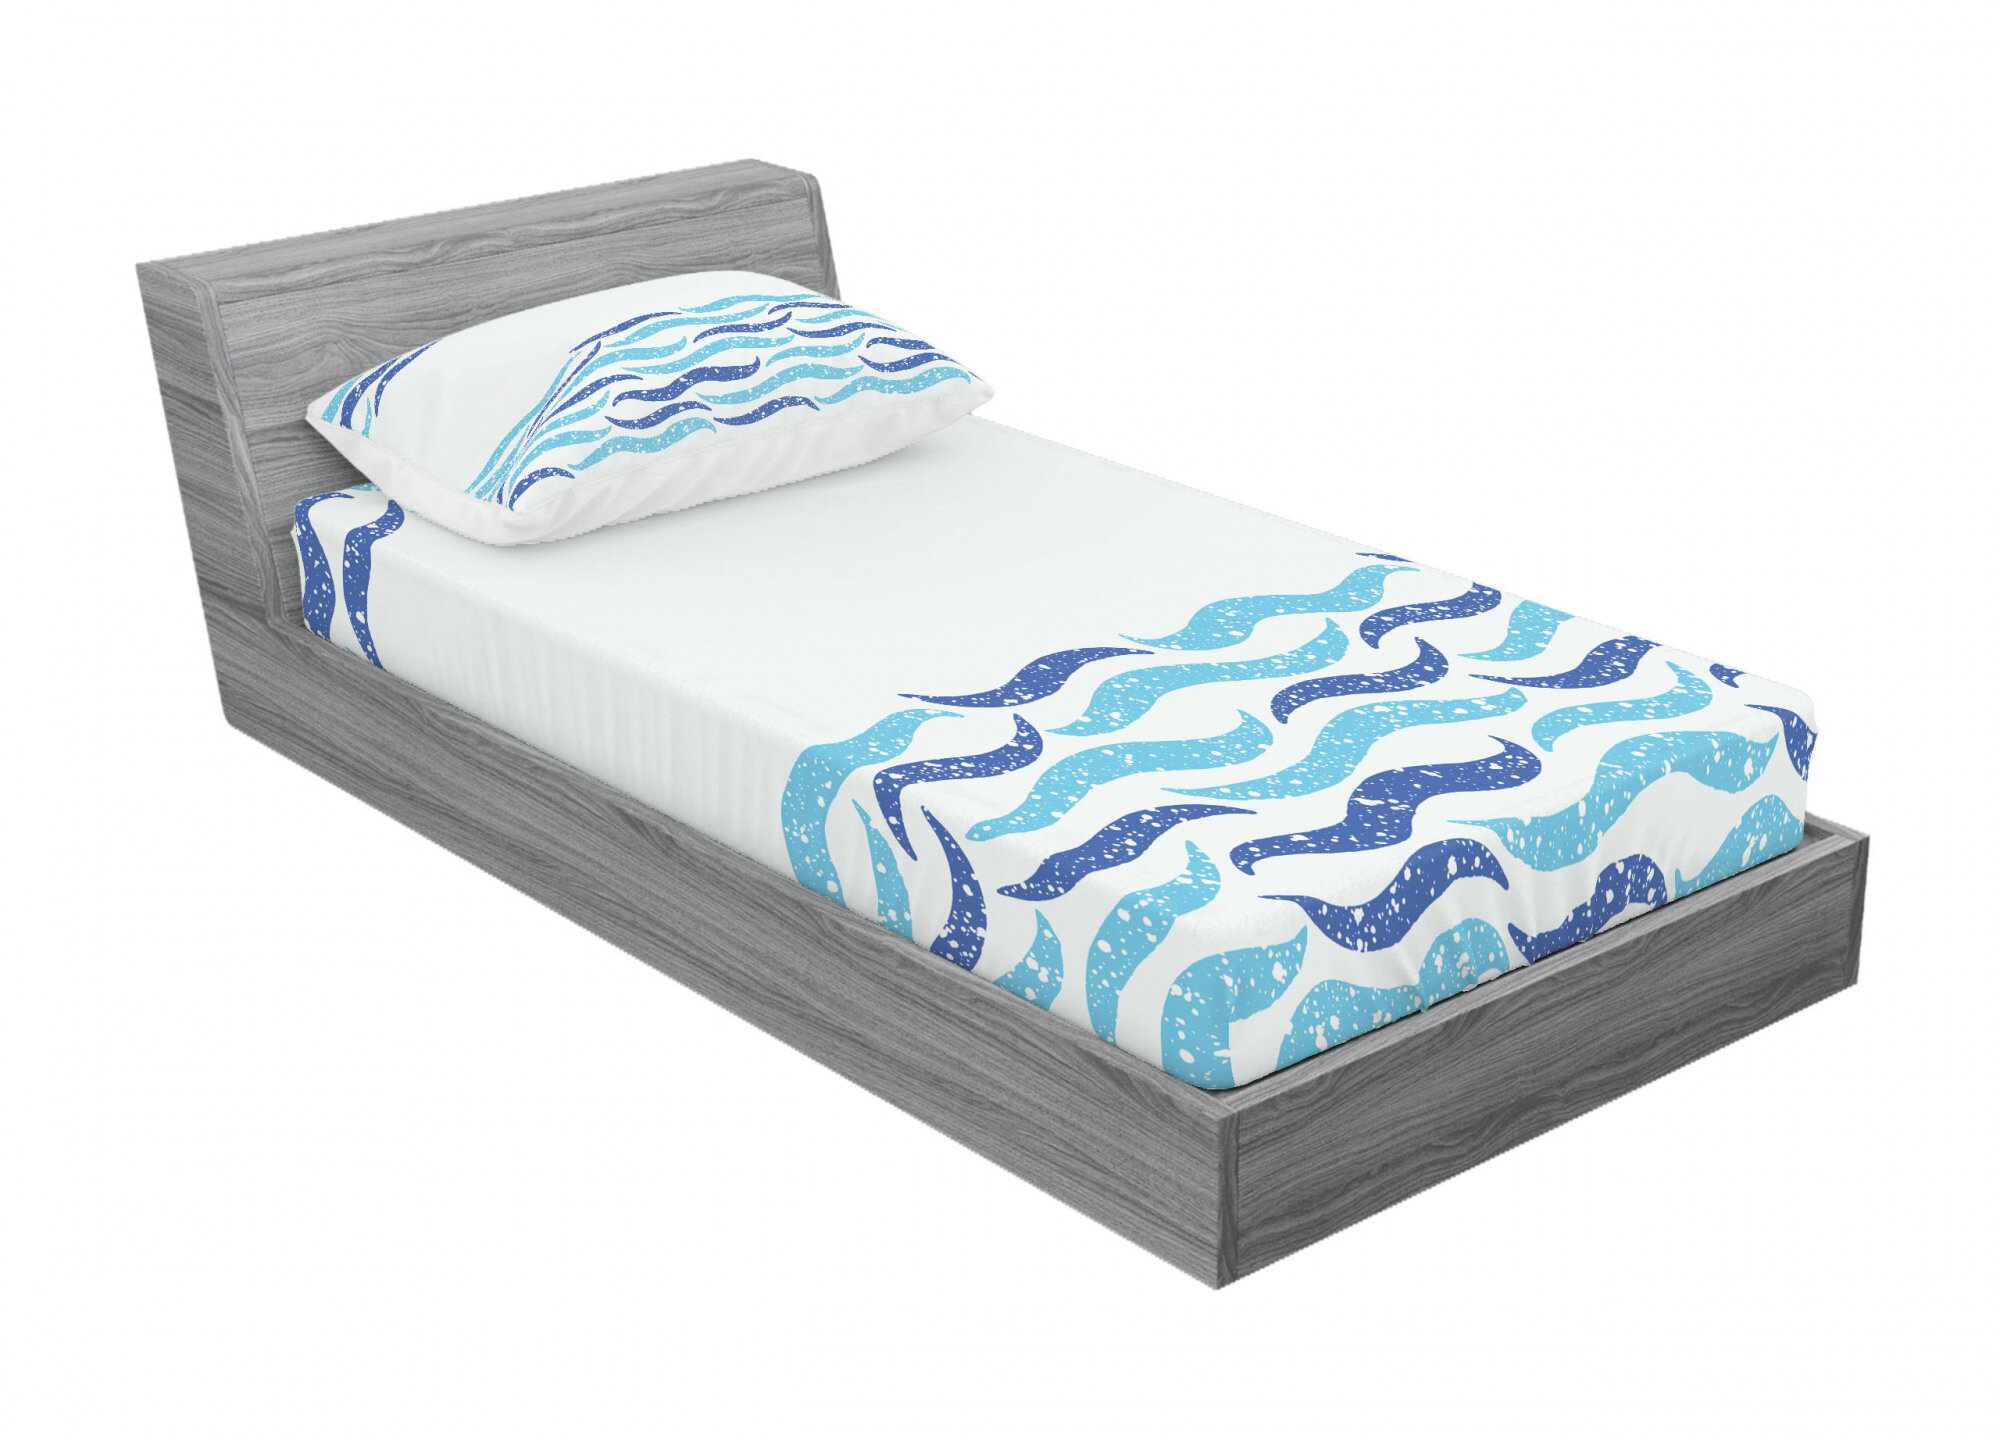 Ehrensburg Diving Dolphins Bunkie Deluxe All-in-One Zipper Bedding Set East Urban Home Size: Full / Double